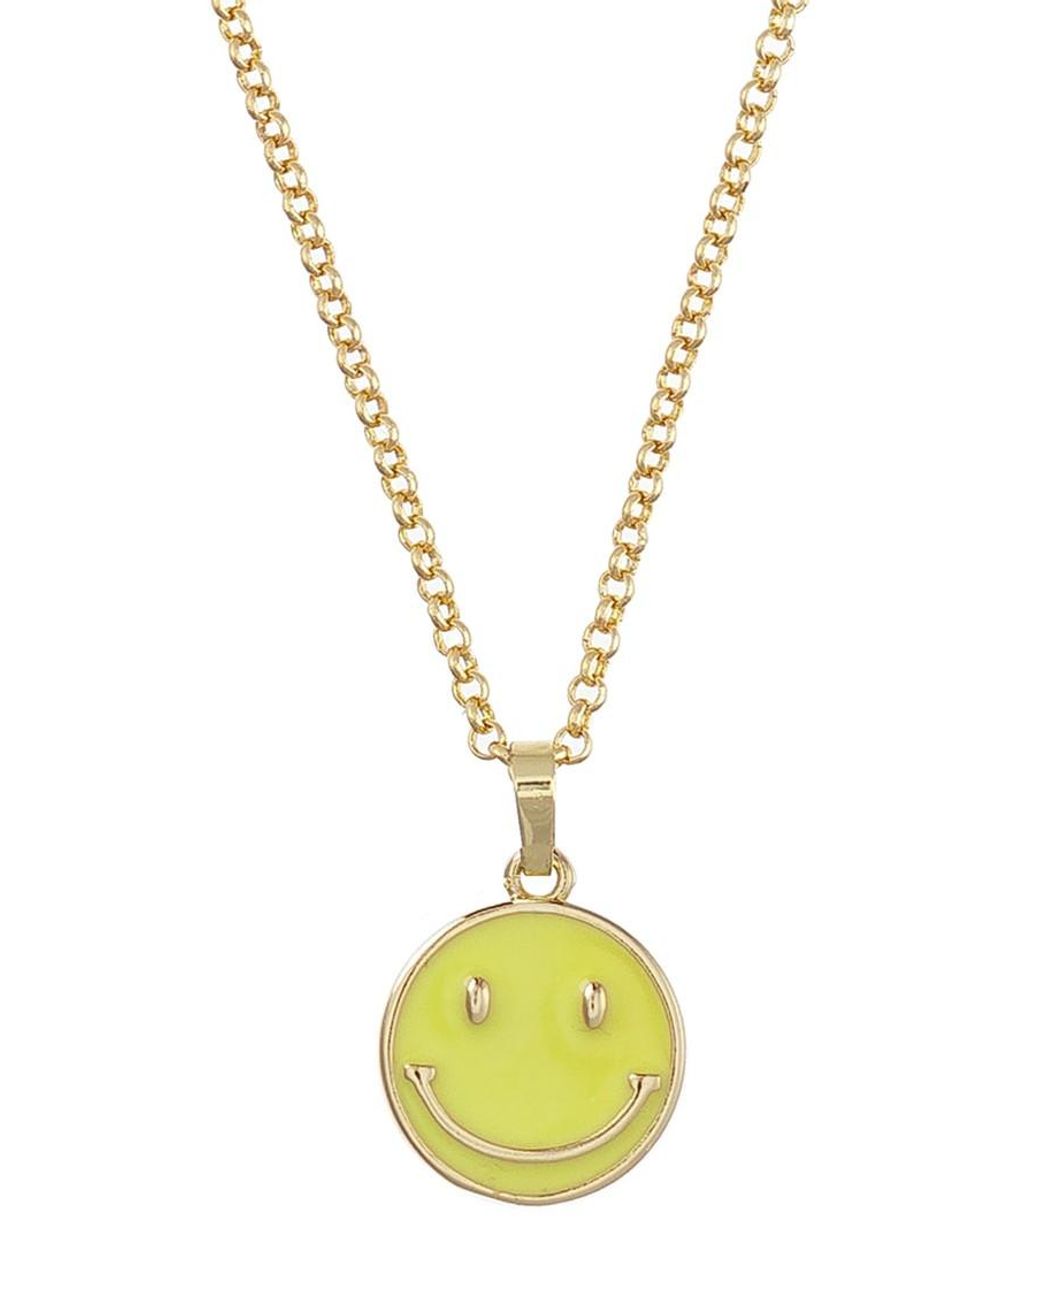 Talis Chains - Joy Necklace - Yellow